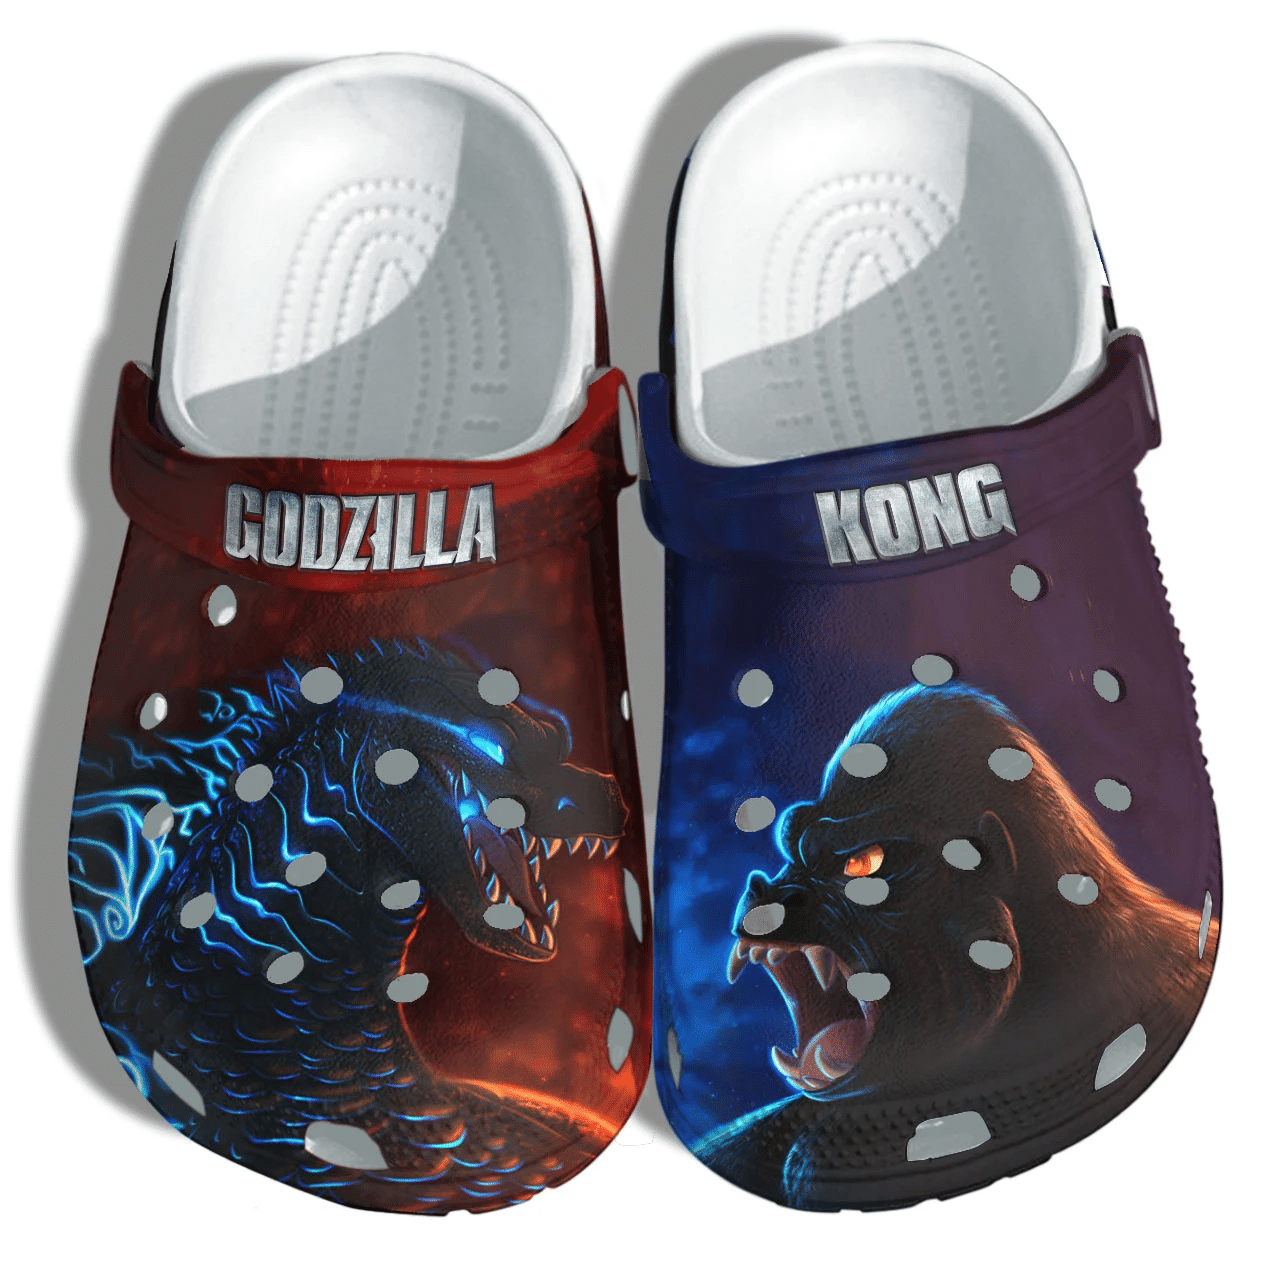 Godzilla Kong Monster Shoes Crocss Funny For Men Women – King Monster Croc Shoes Gifts Fathers Day